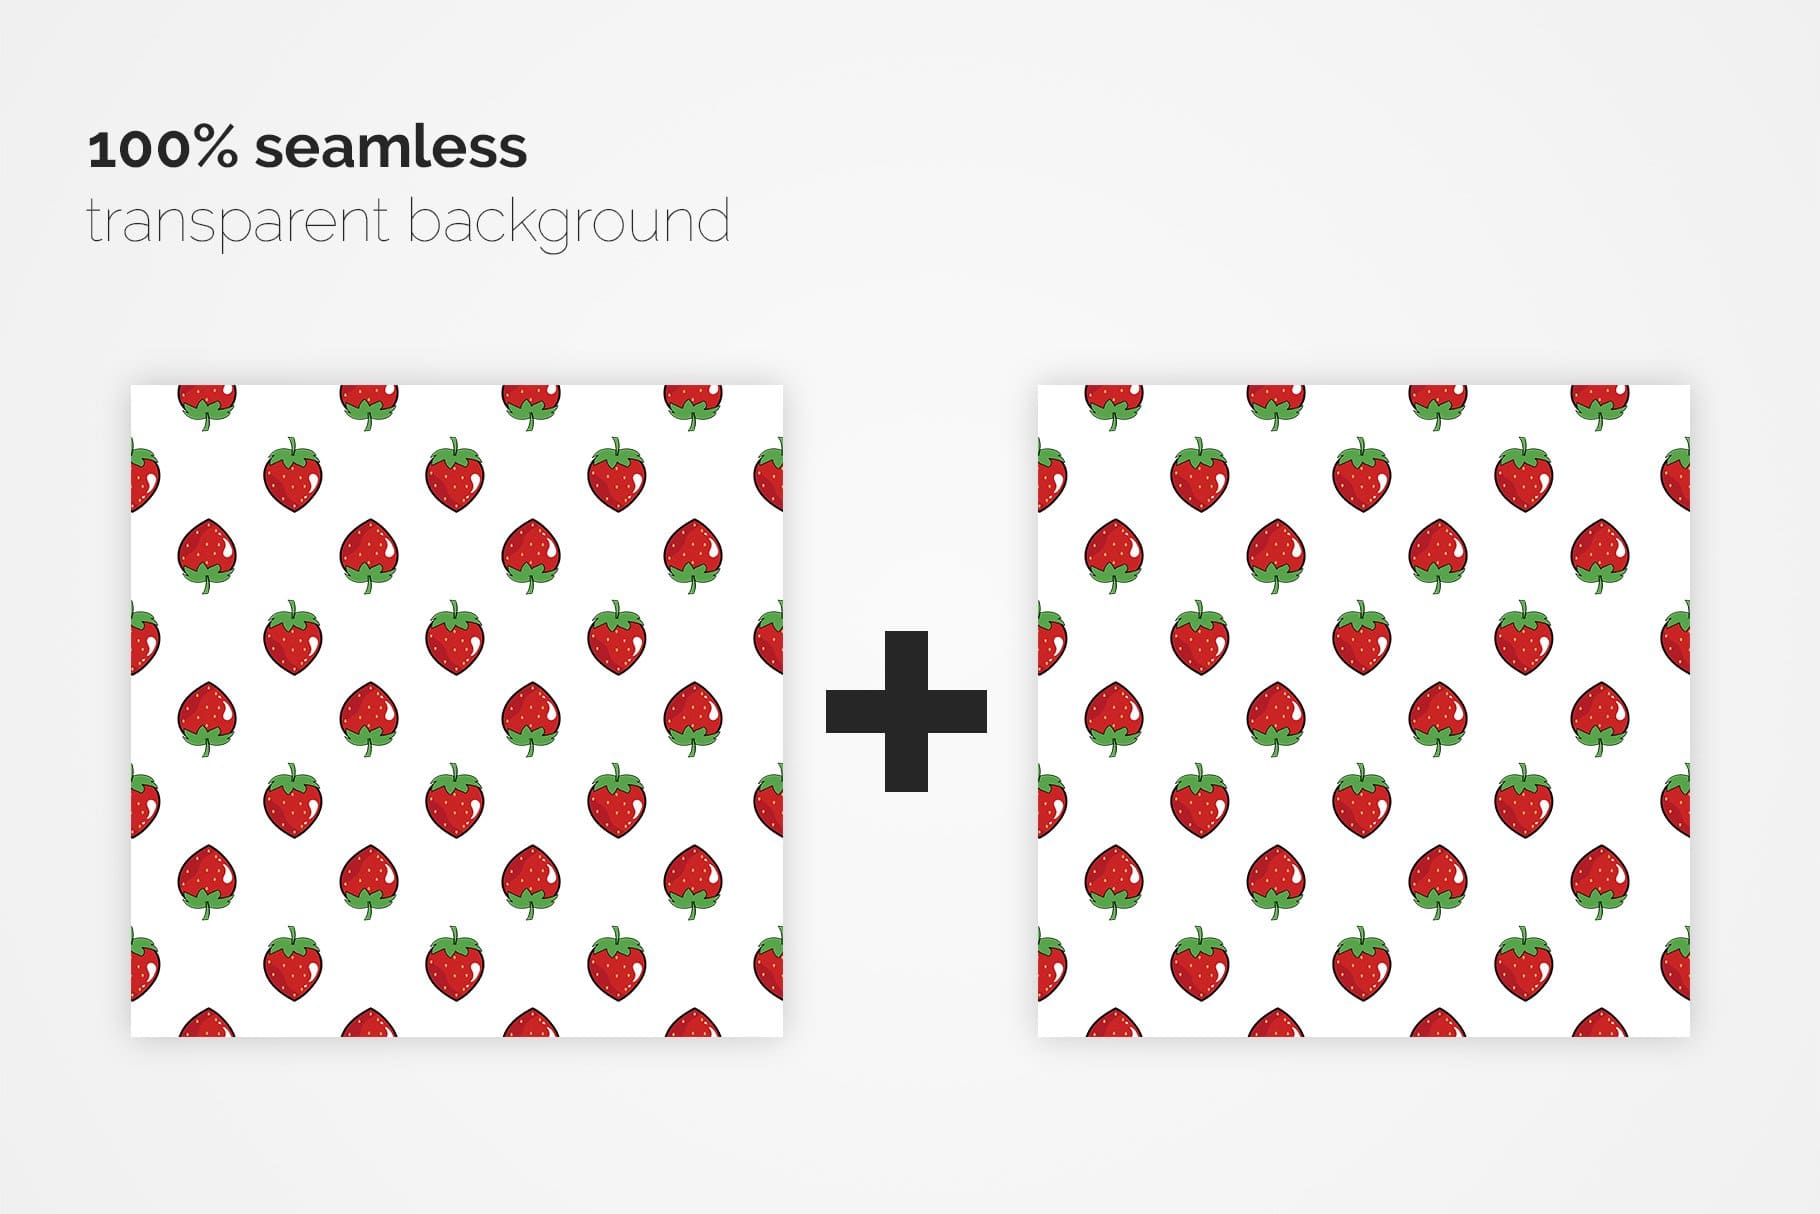 100% seamless transparent background of Strawberries seamless patterns.